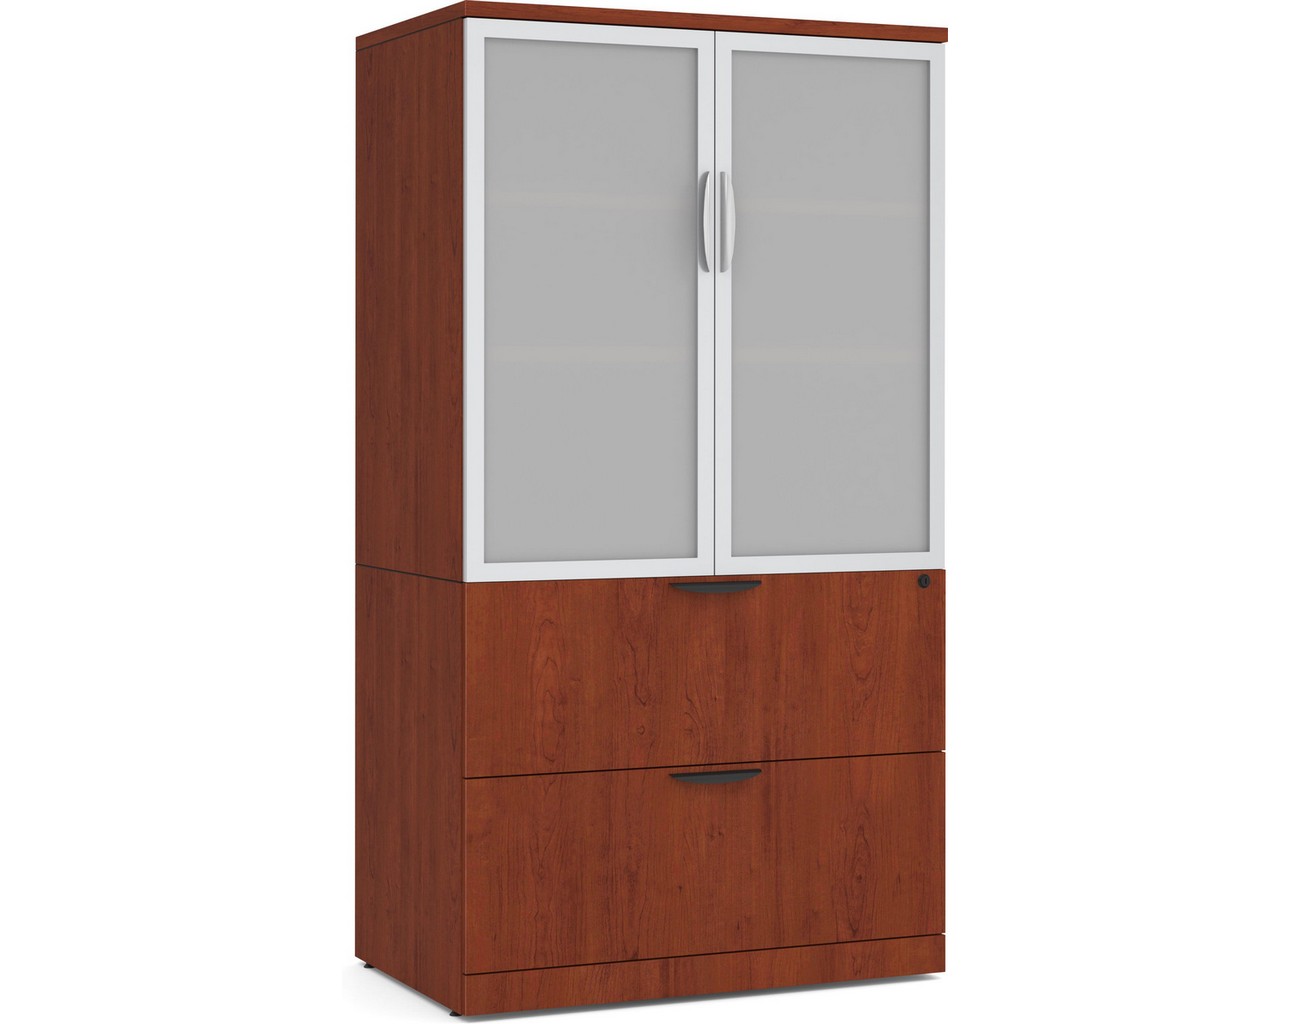 Locking Storage Cabinet and Lateral File Combo Unit with Glass Doors – Cherry